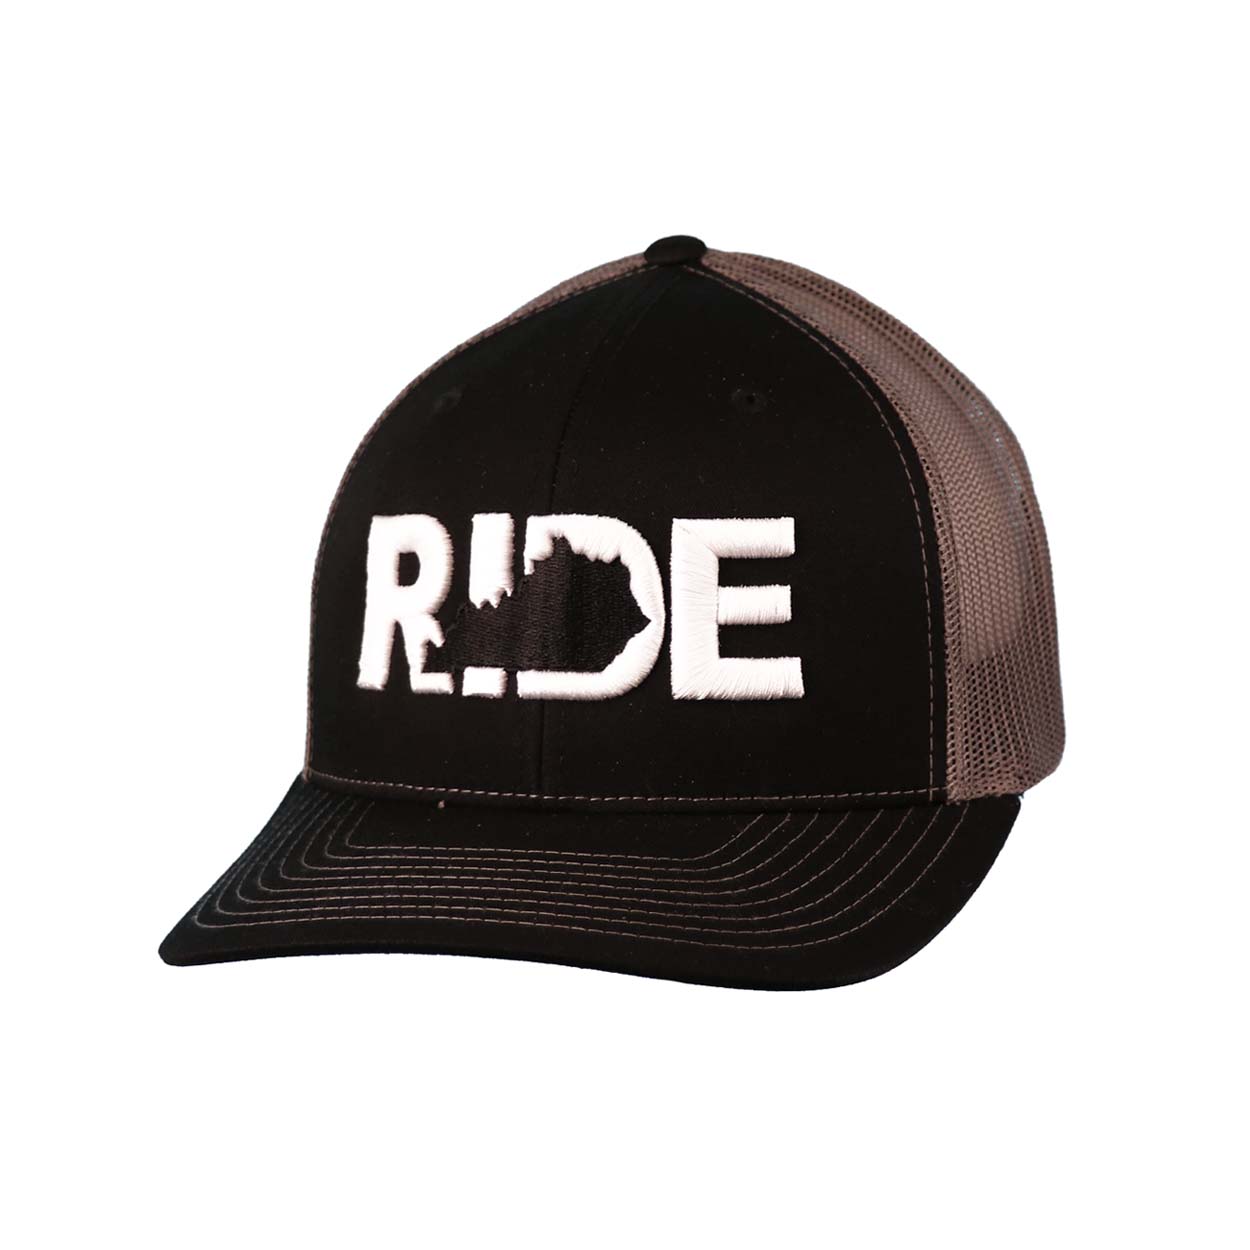 Ride Kentucky Classic Pro 3D Puff Embroidered Snapback Trucker Hat Black/Gray